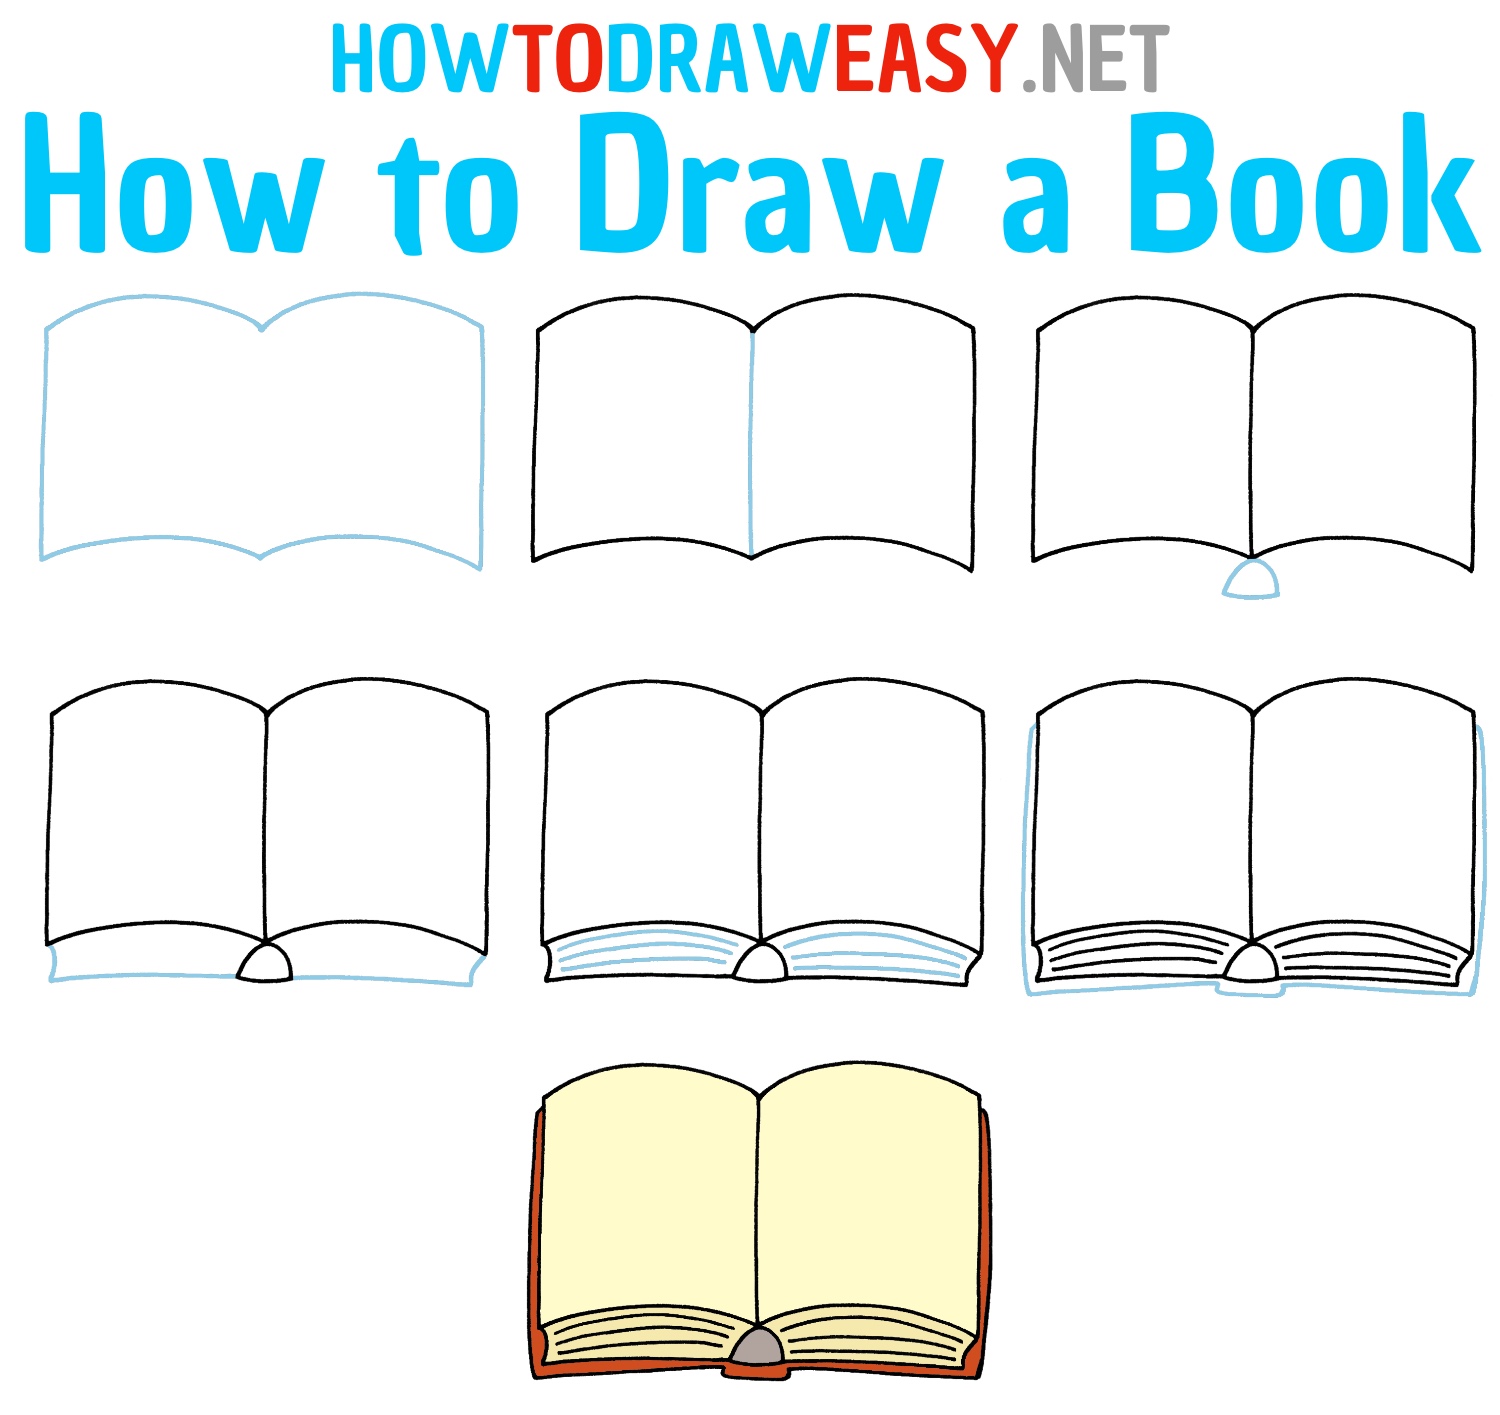 How to Draw a Book Step by Step